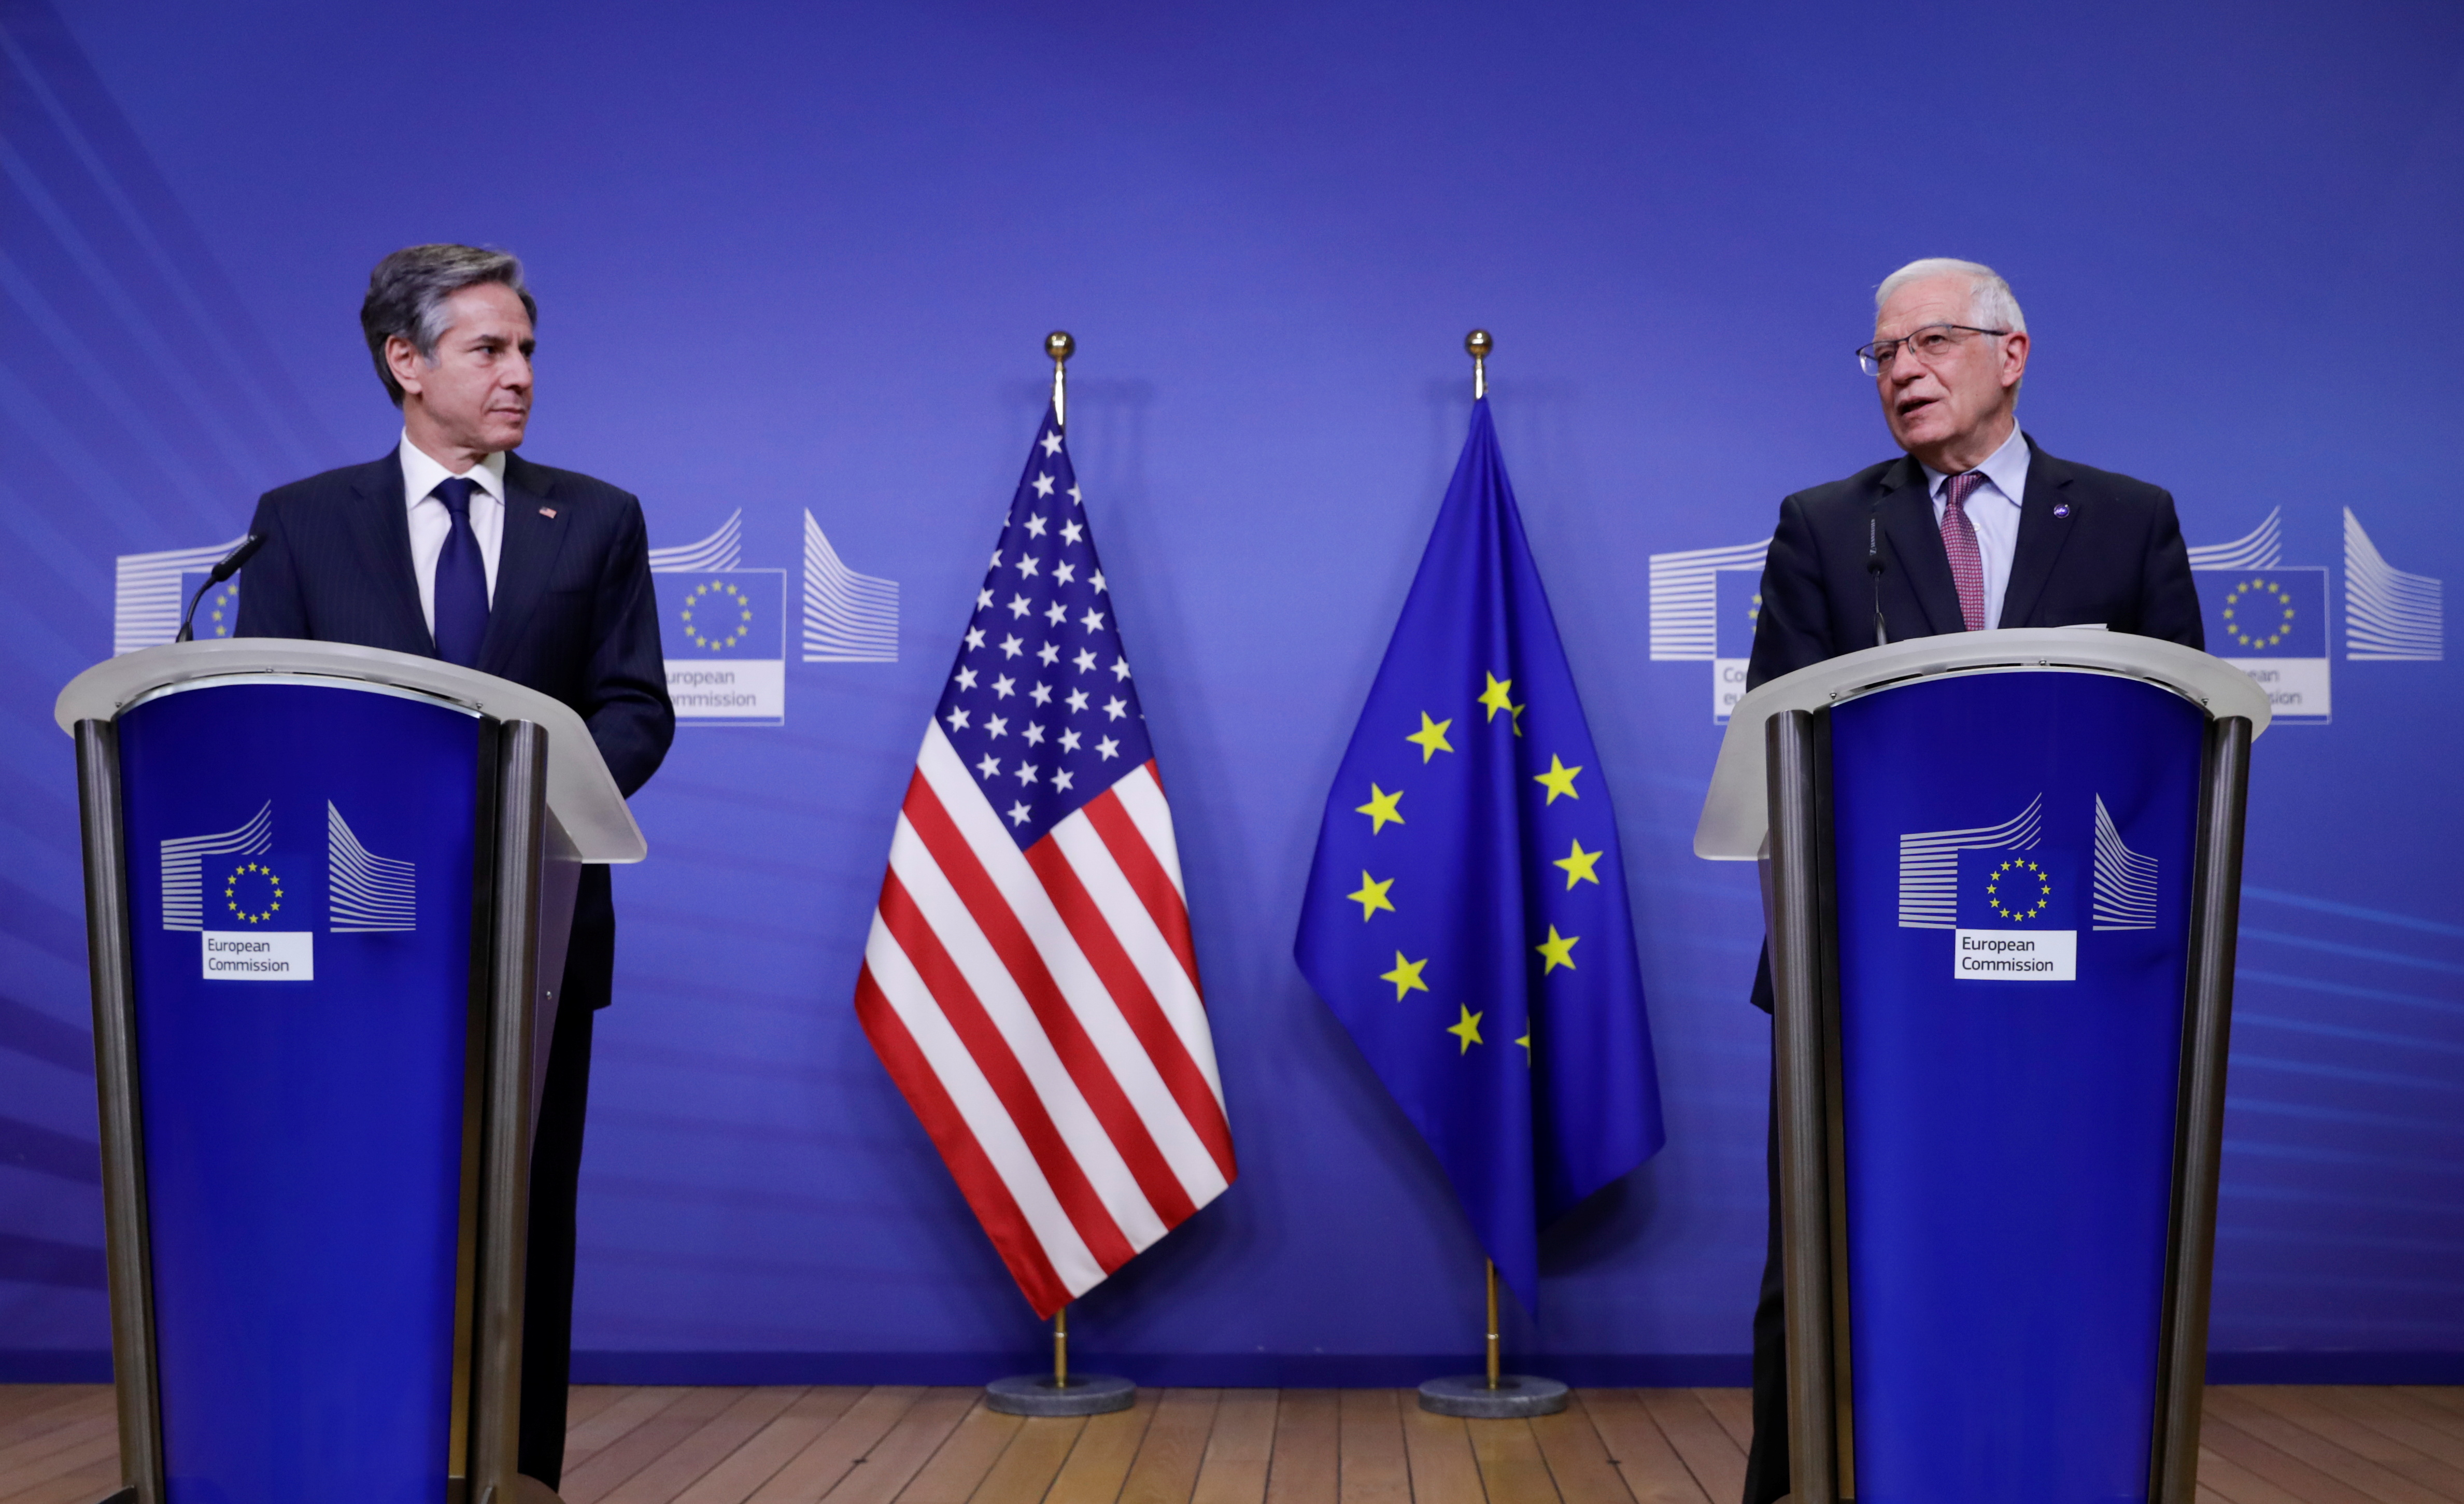 U.S. Secretary of State Blinken meets EU foreign policy chief Borrell in Brussels